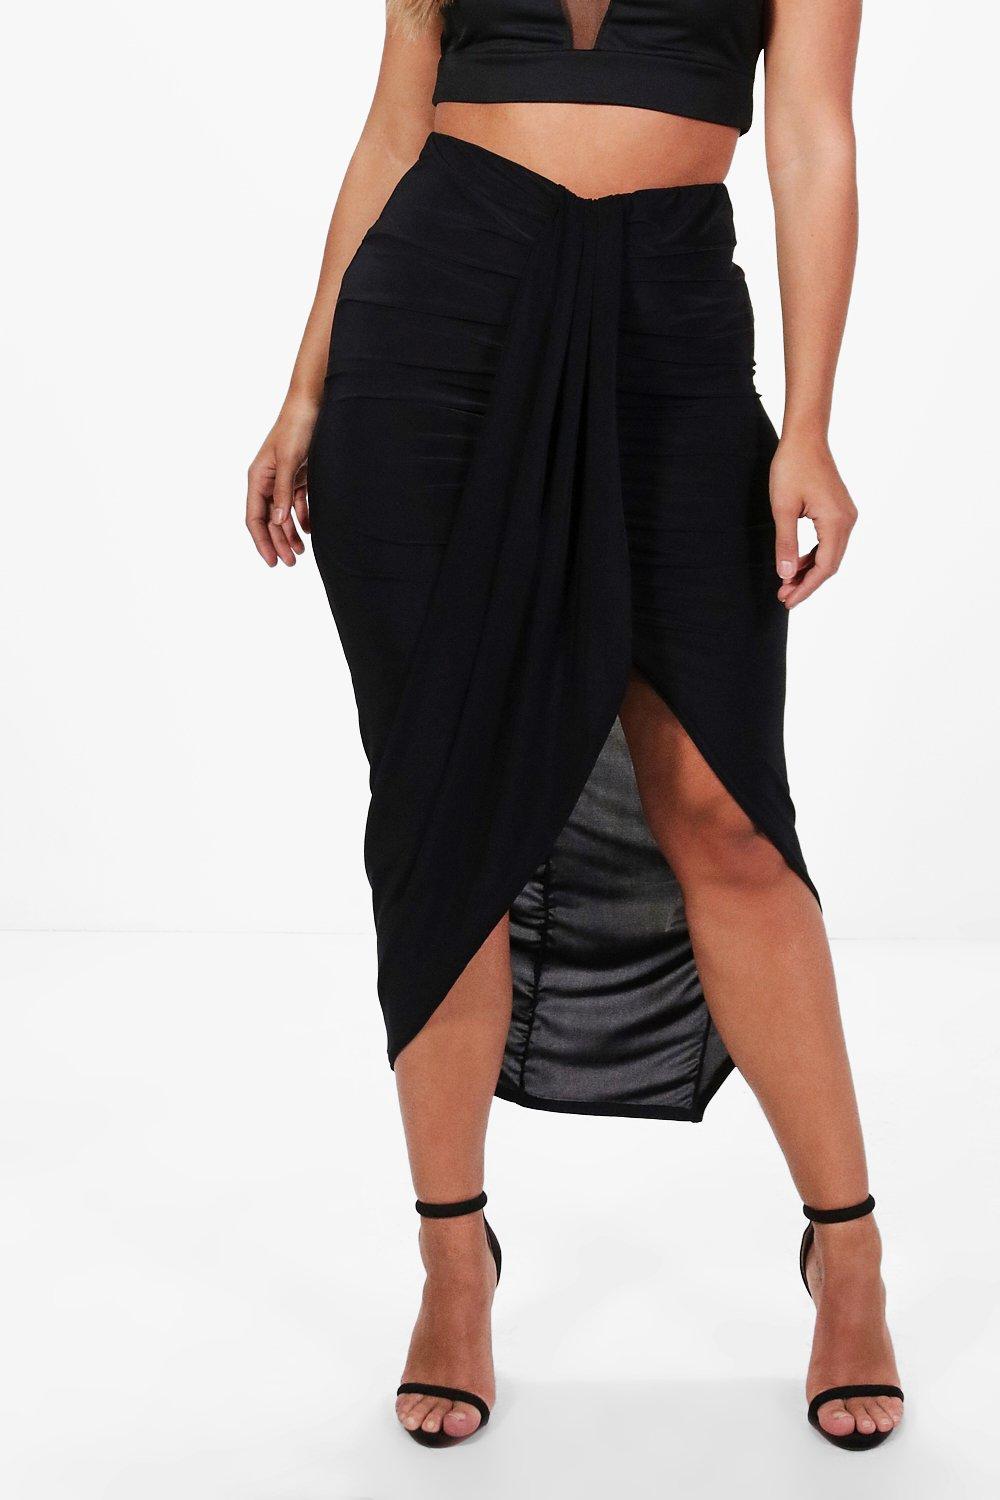 Boohoo Womens Plus Renee Ruched Wrap Front Maxi Skirt Ebay